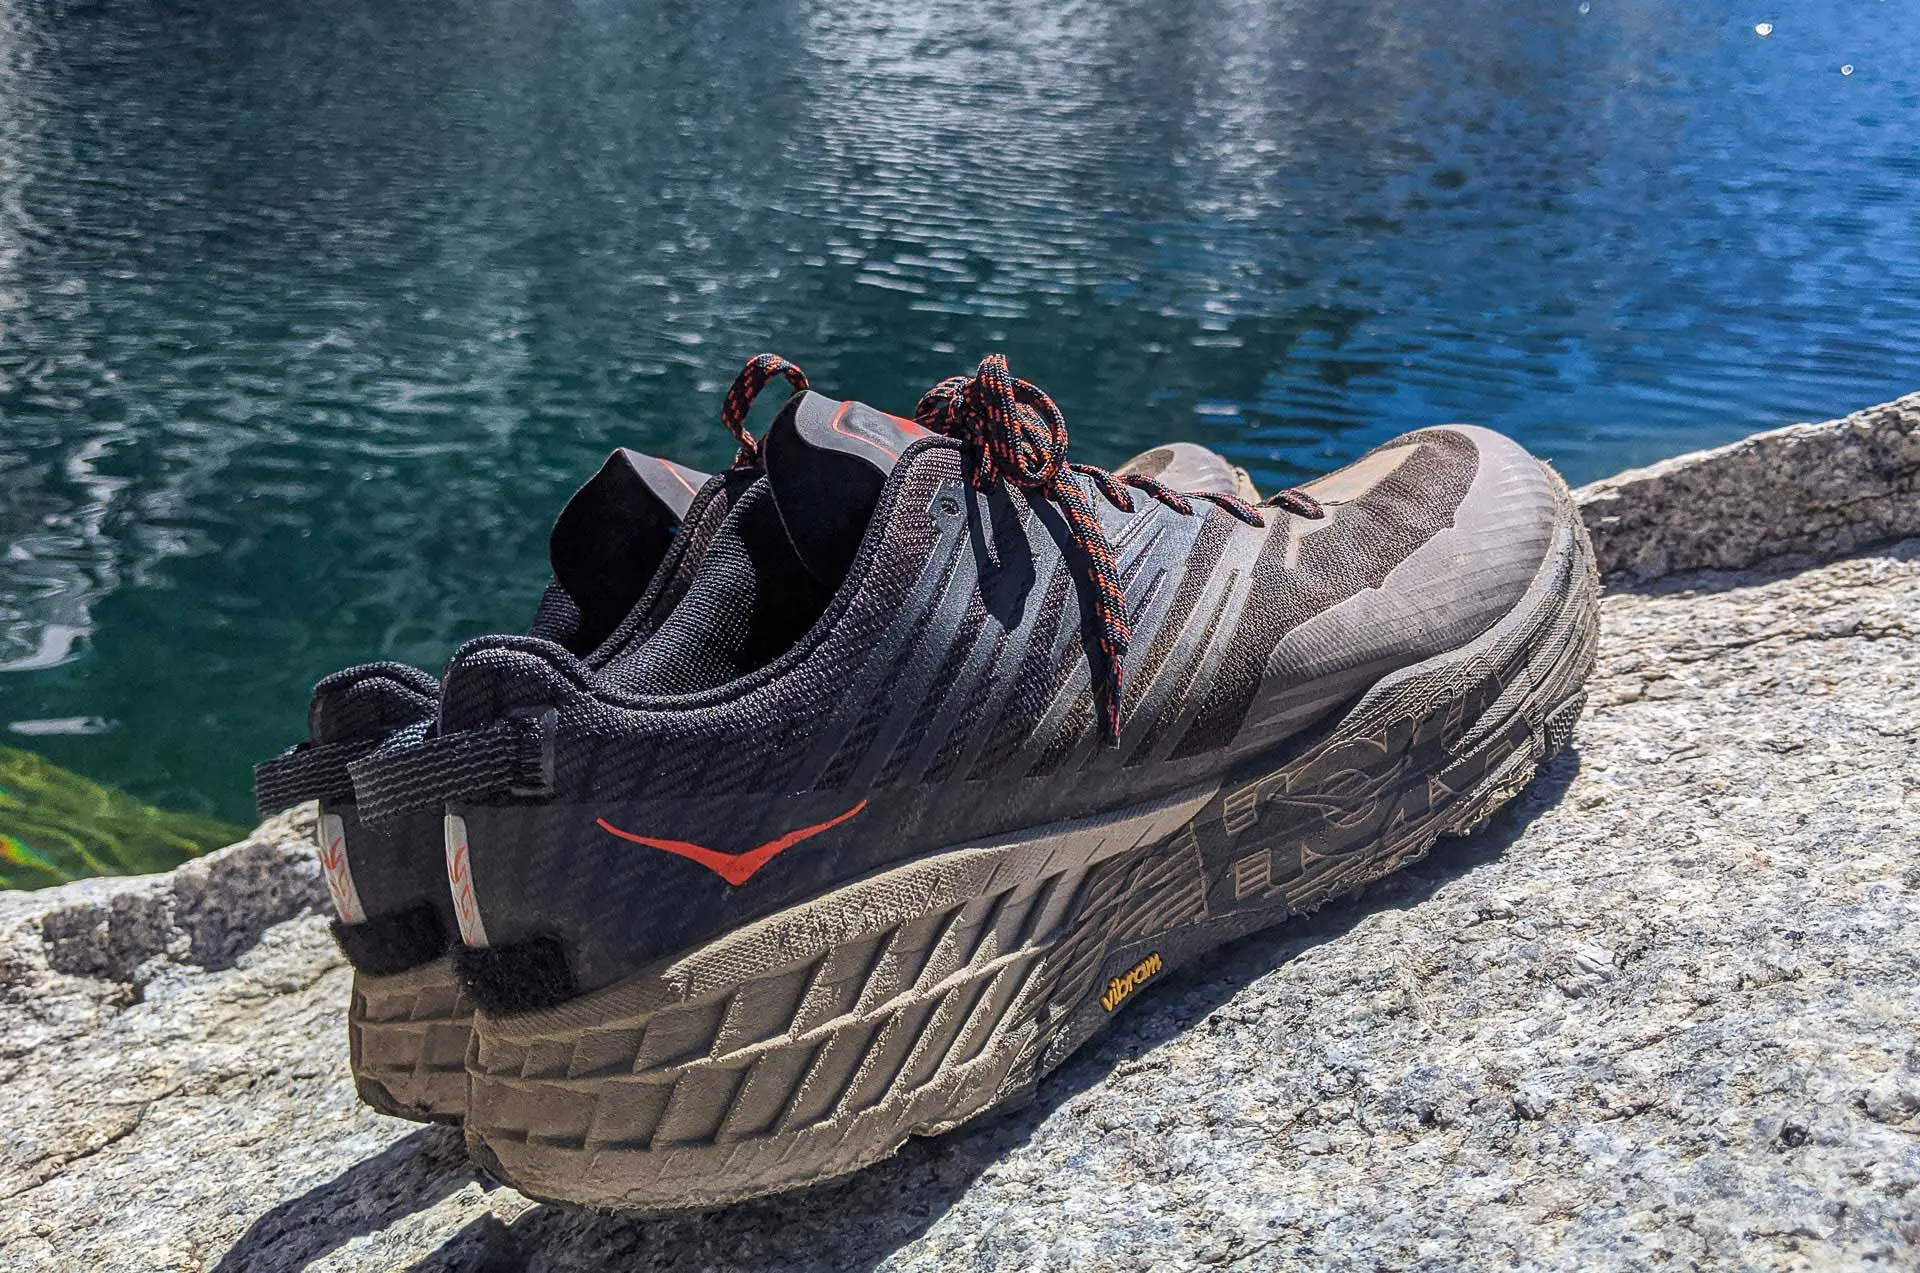 The Hoka Speedgoat Complete Review Hiking Shoes | lupon.gov.ph